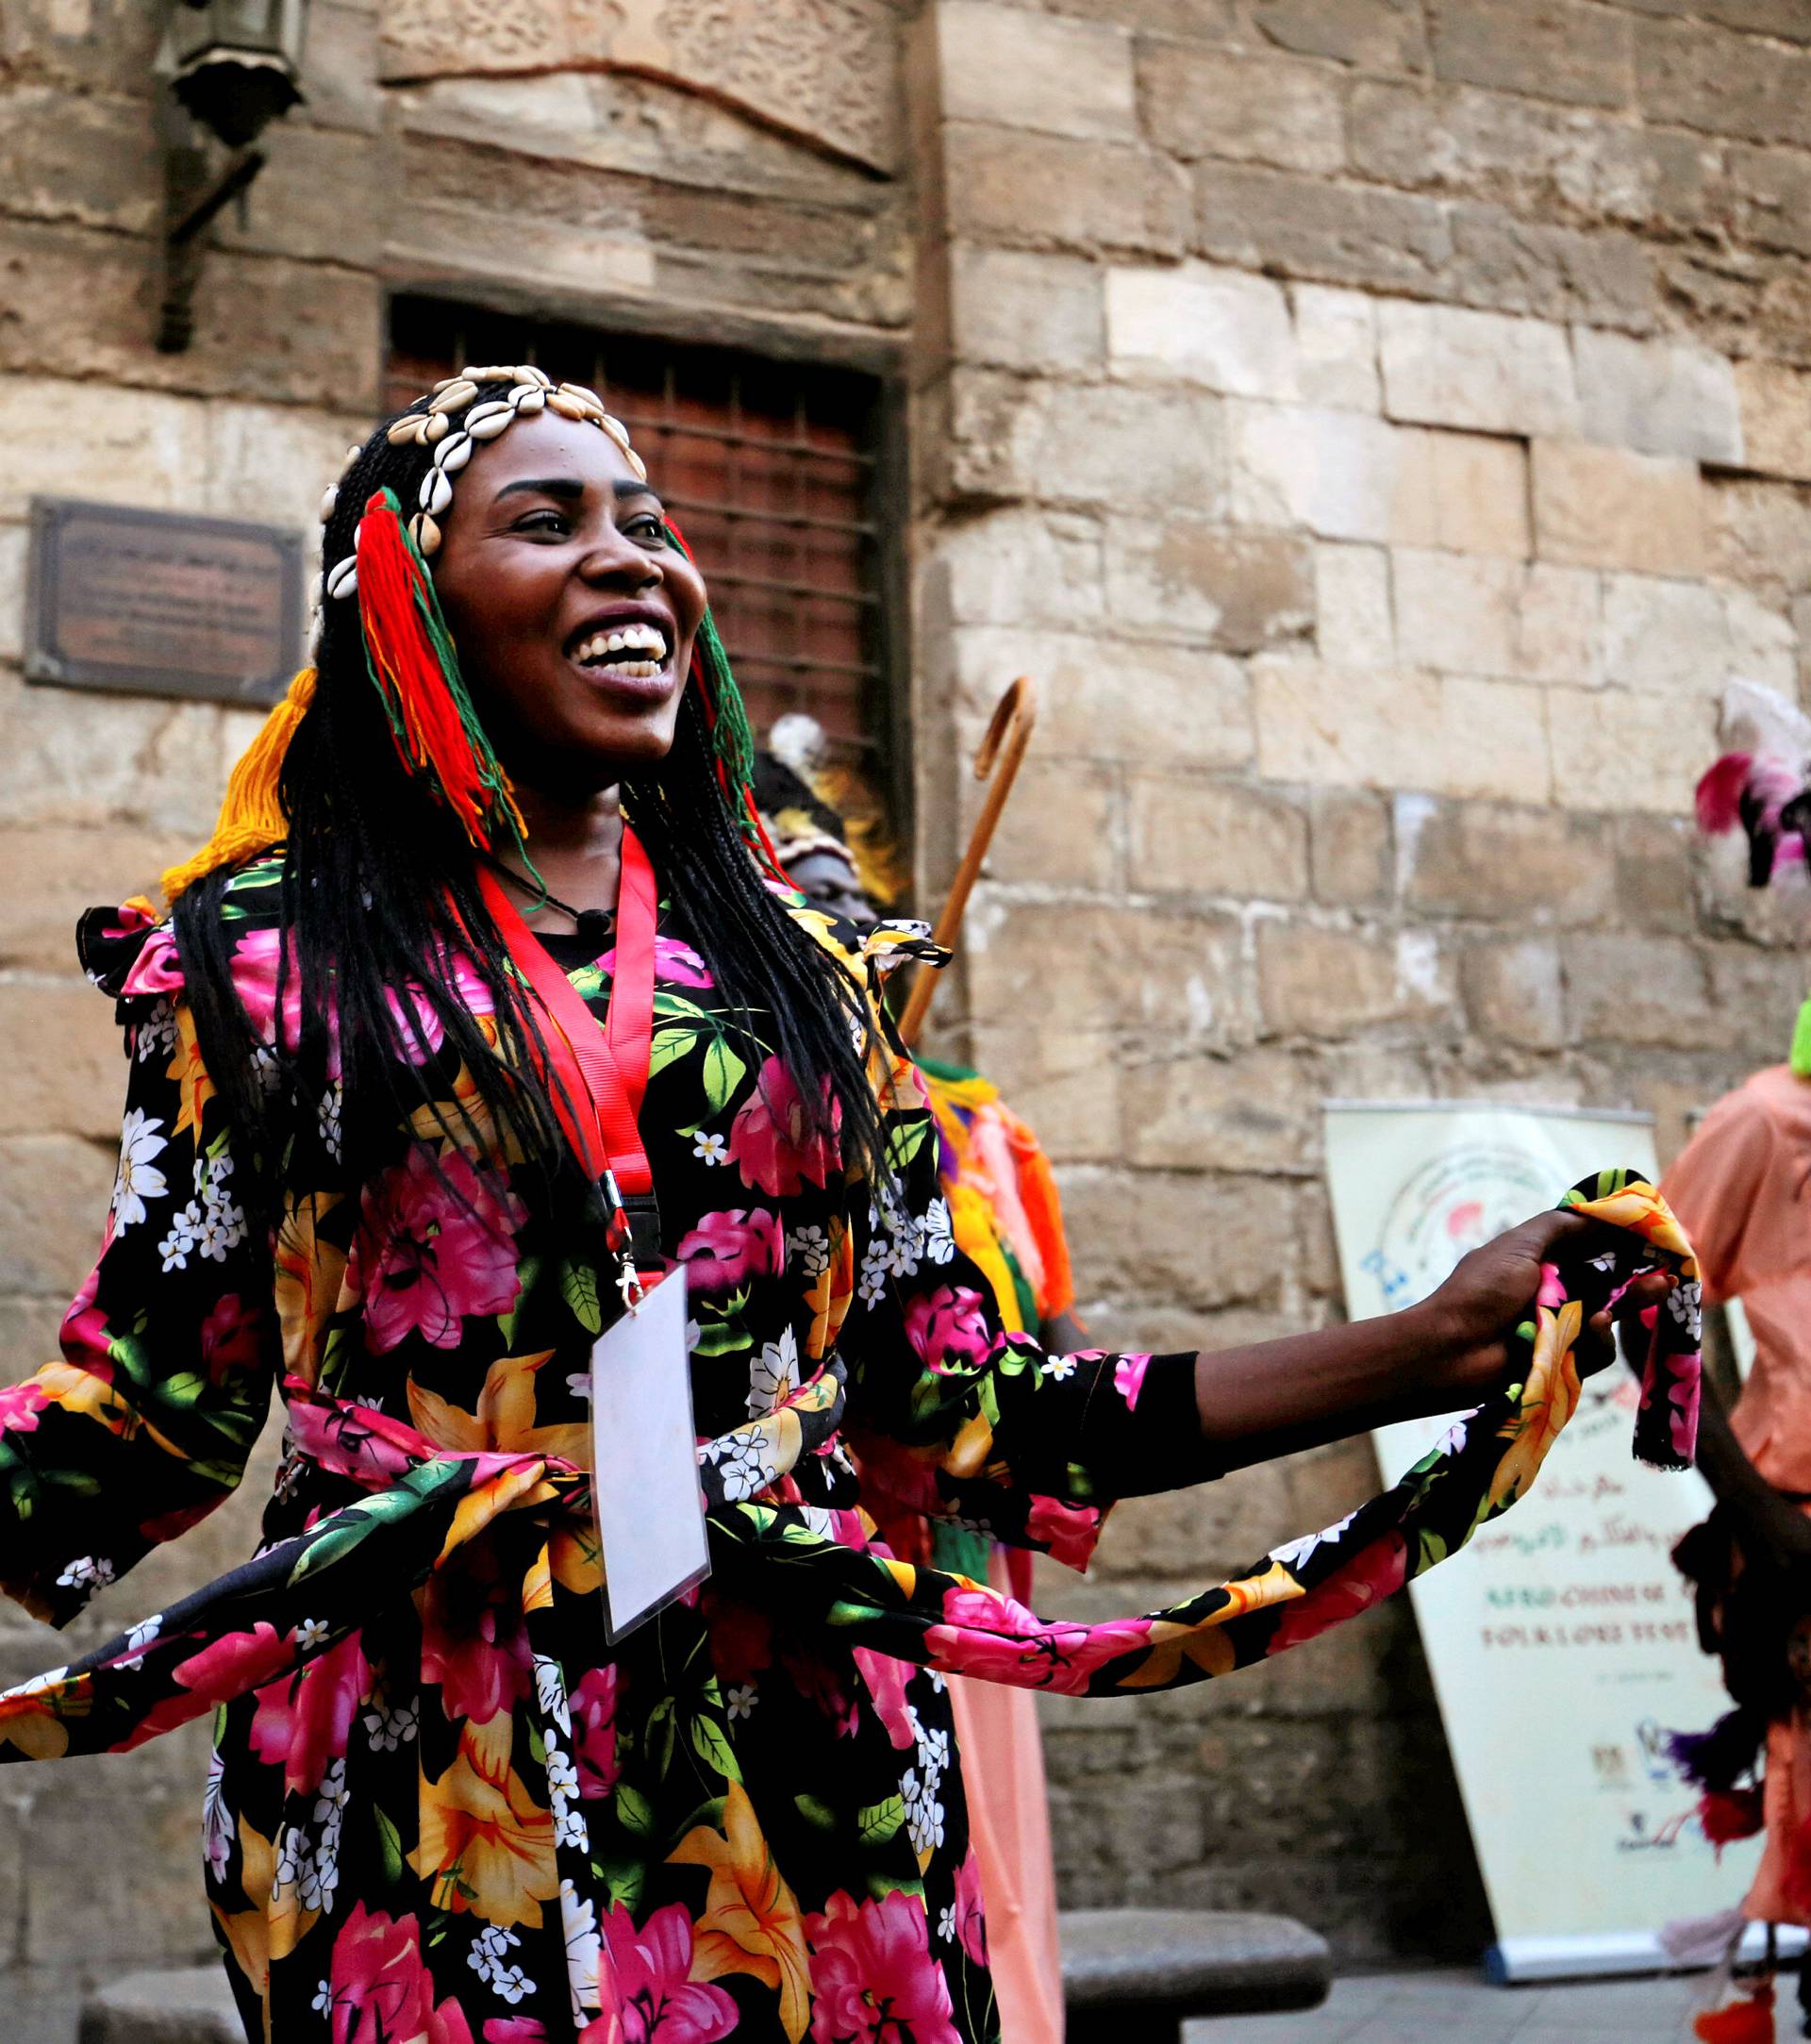 Members of a Sudanese and Eritrean dance group perform a traditional folk dance during the African-Chinese cultural festival, organised by Egypt's Ministry of Tourism, on the historic Moez Street, in Cairo